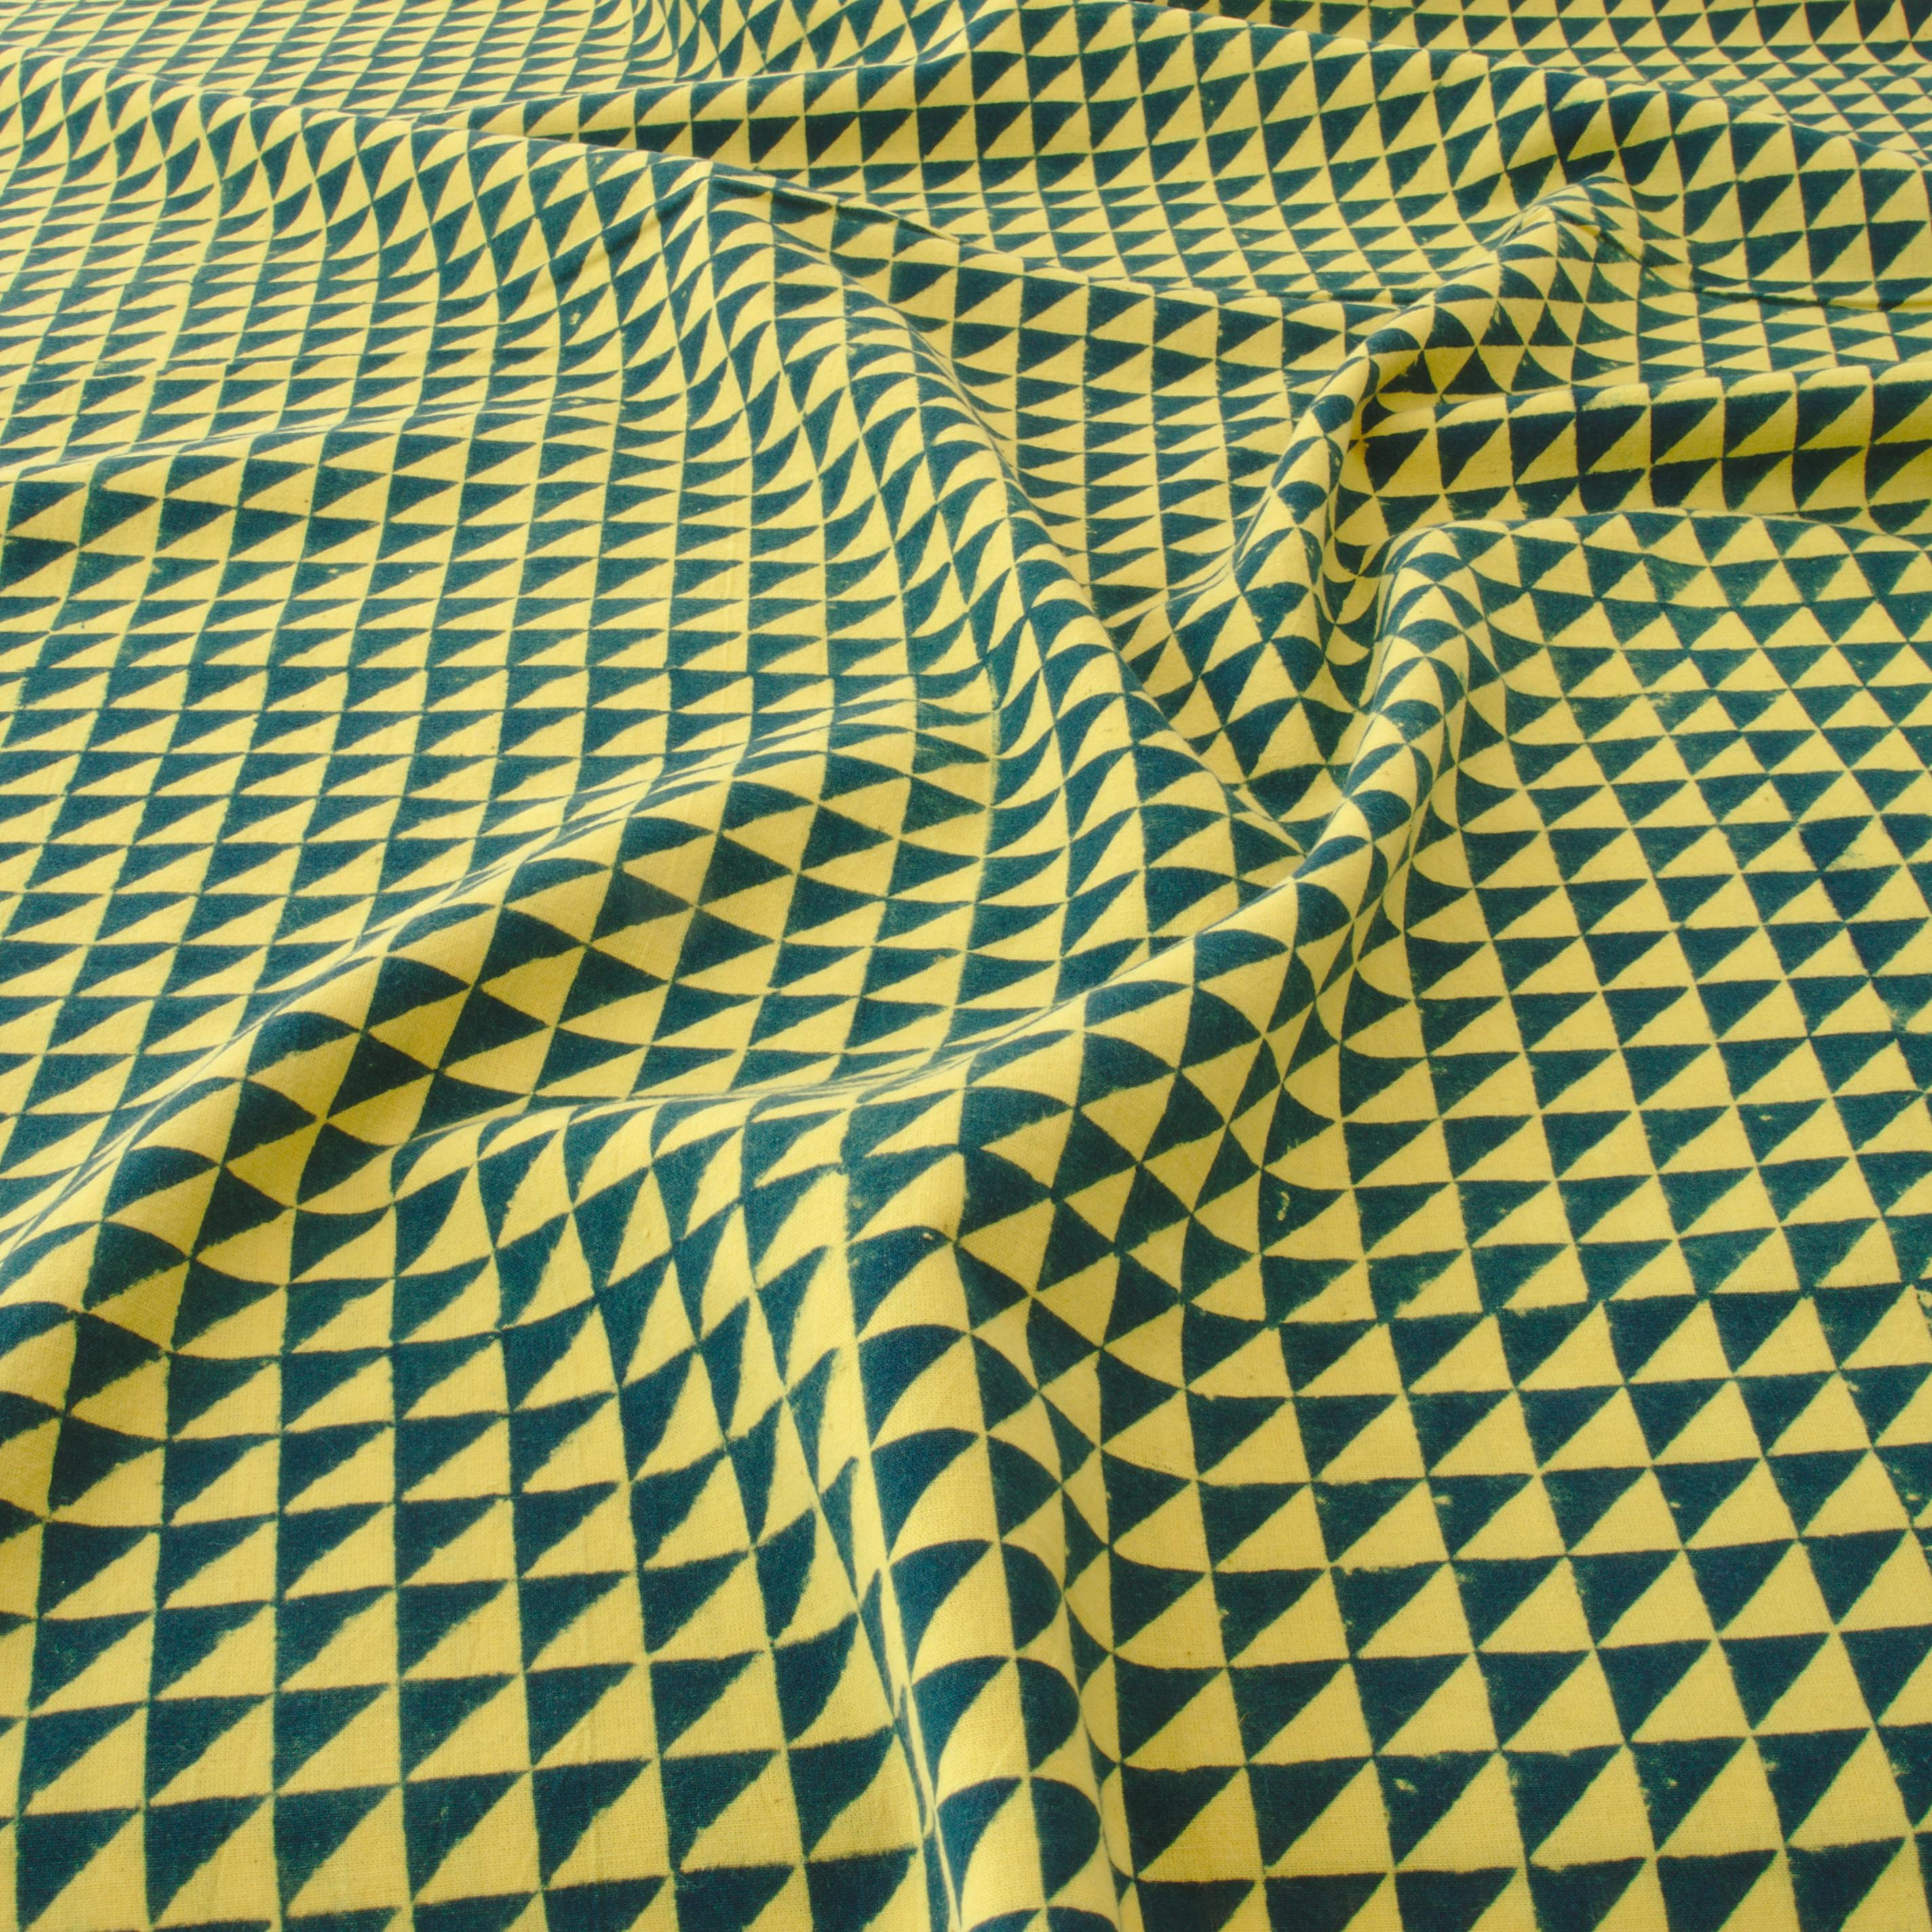 SIK27 - Block-Printed Cotton Fabric From India - Half Squares Design - Pomegranate Yellow and Green Indigo Dye - Angle